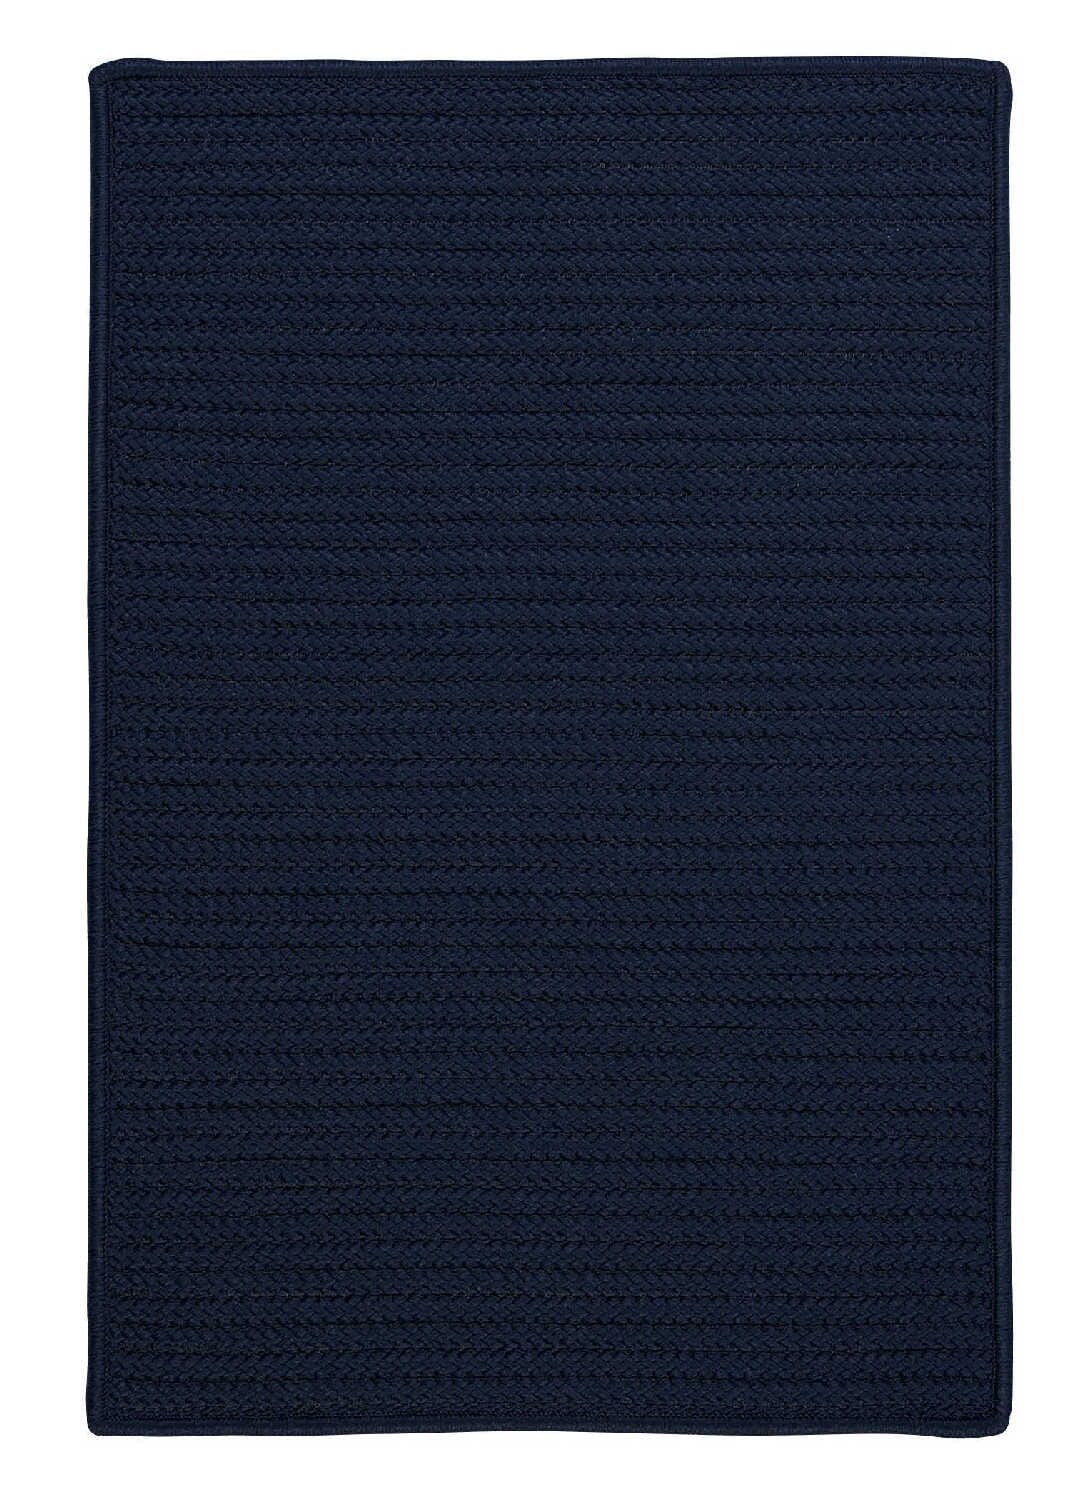 Colonial Mills Simply Home Solid H561 Navy / Blue Solid Color Area Rug